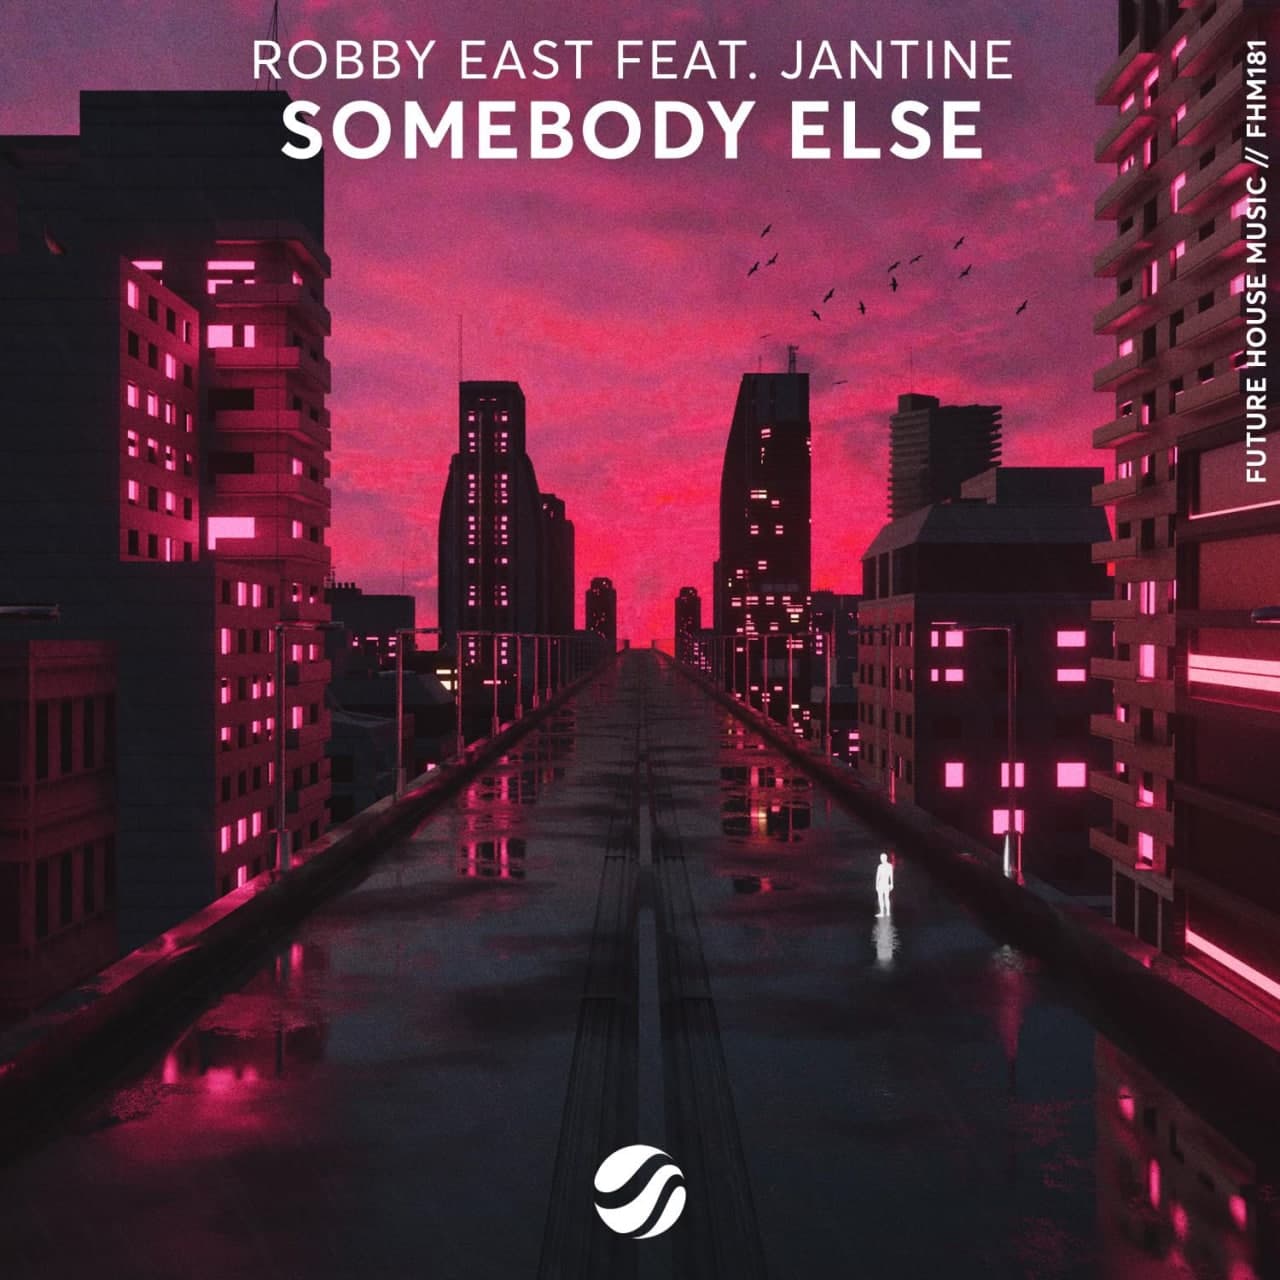 Robby East Feat. Jantine - Somebody Else (Extended Mix)